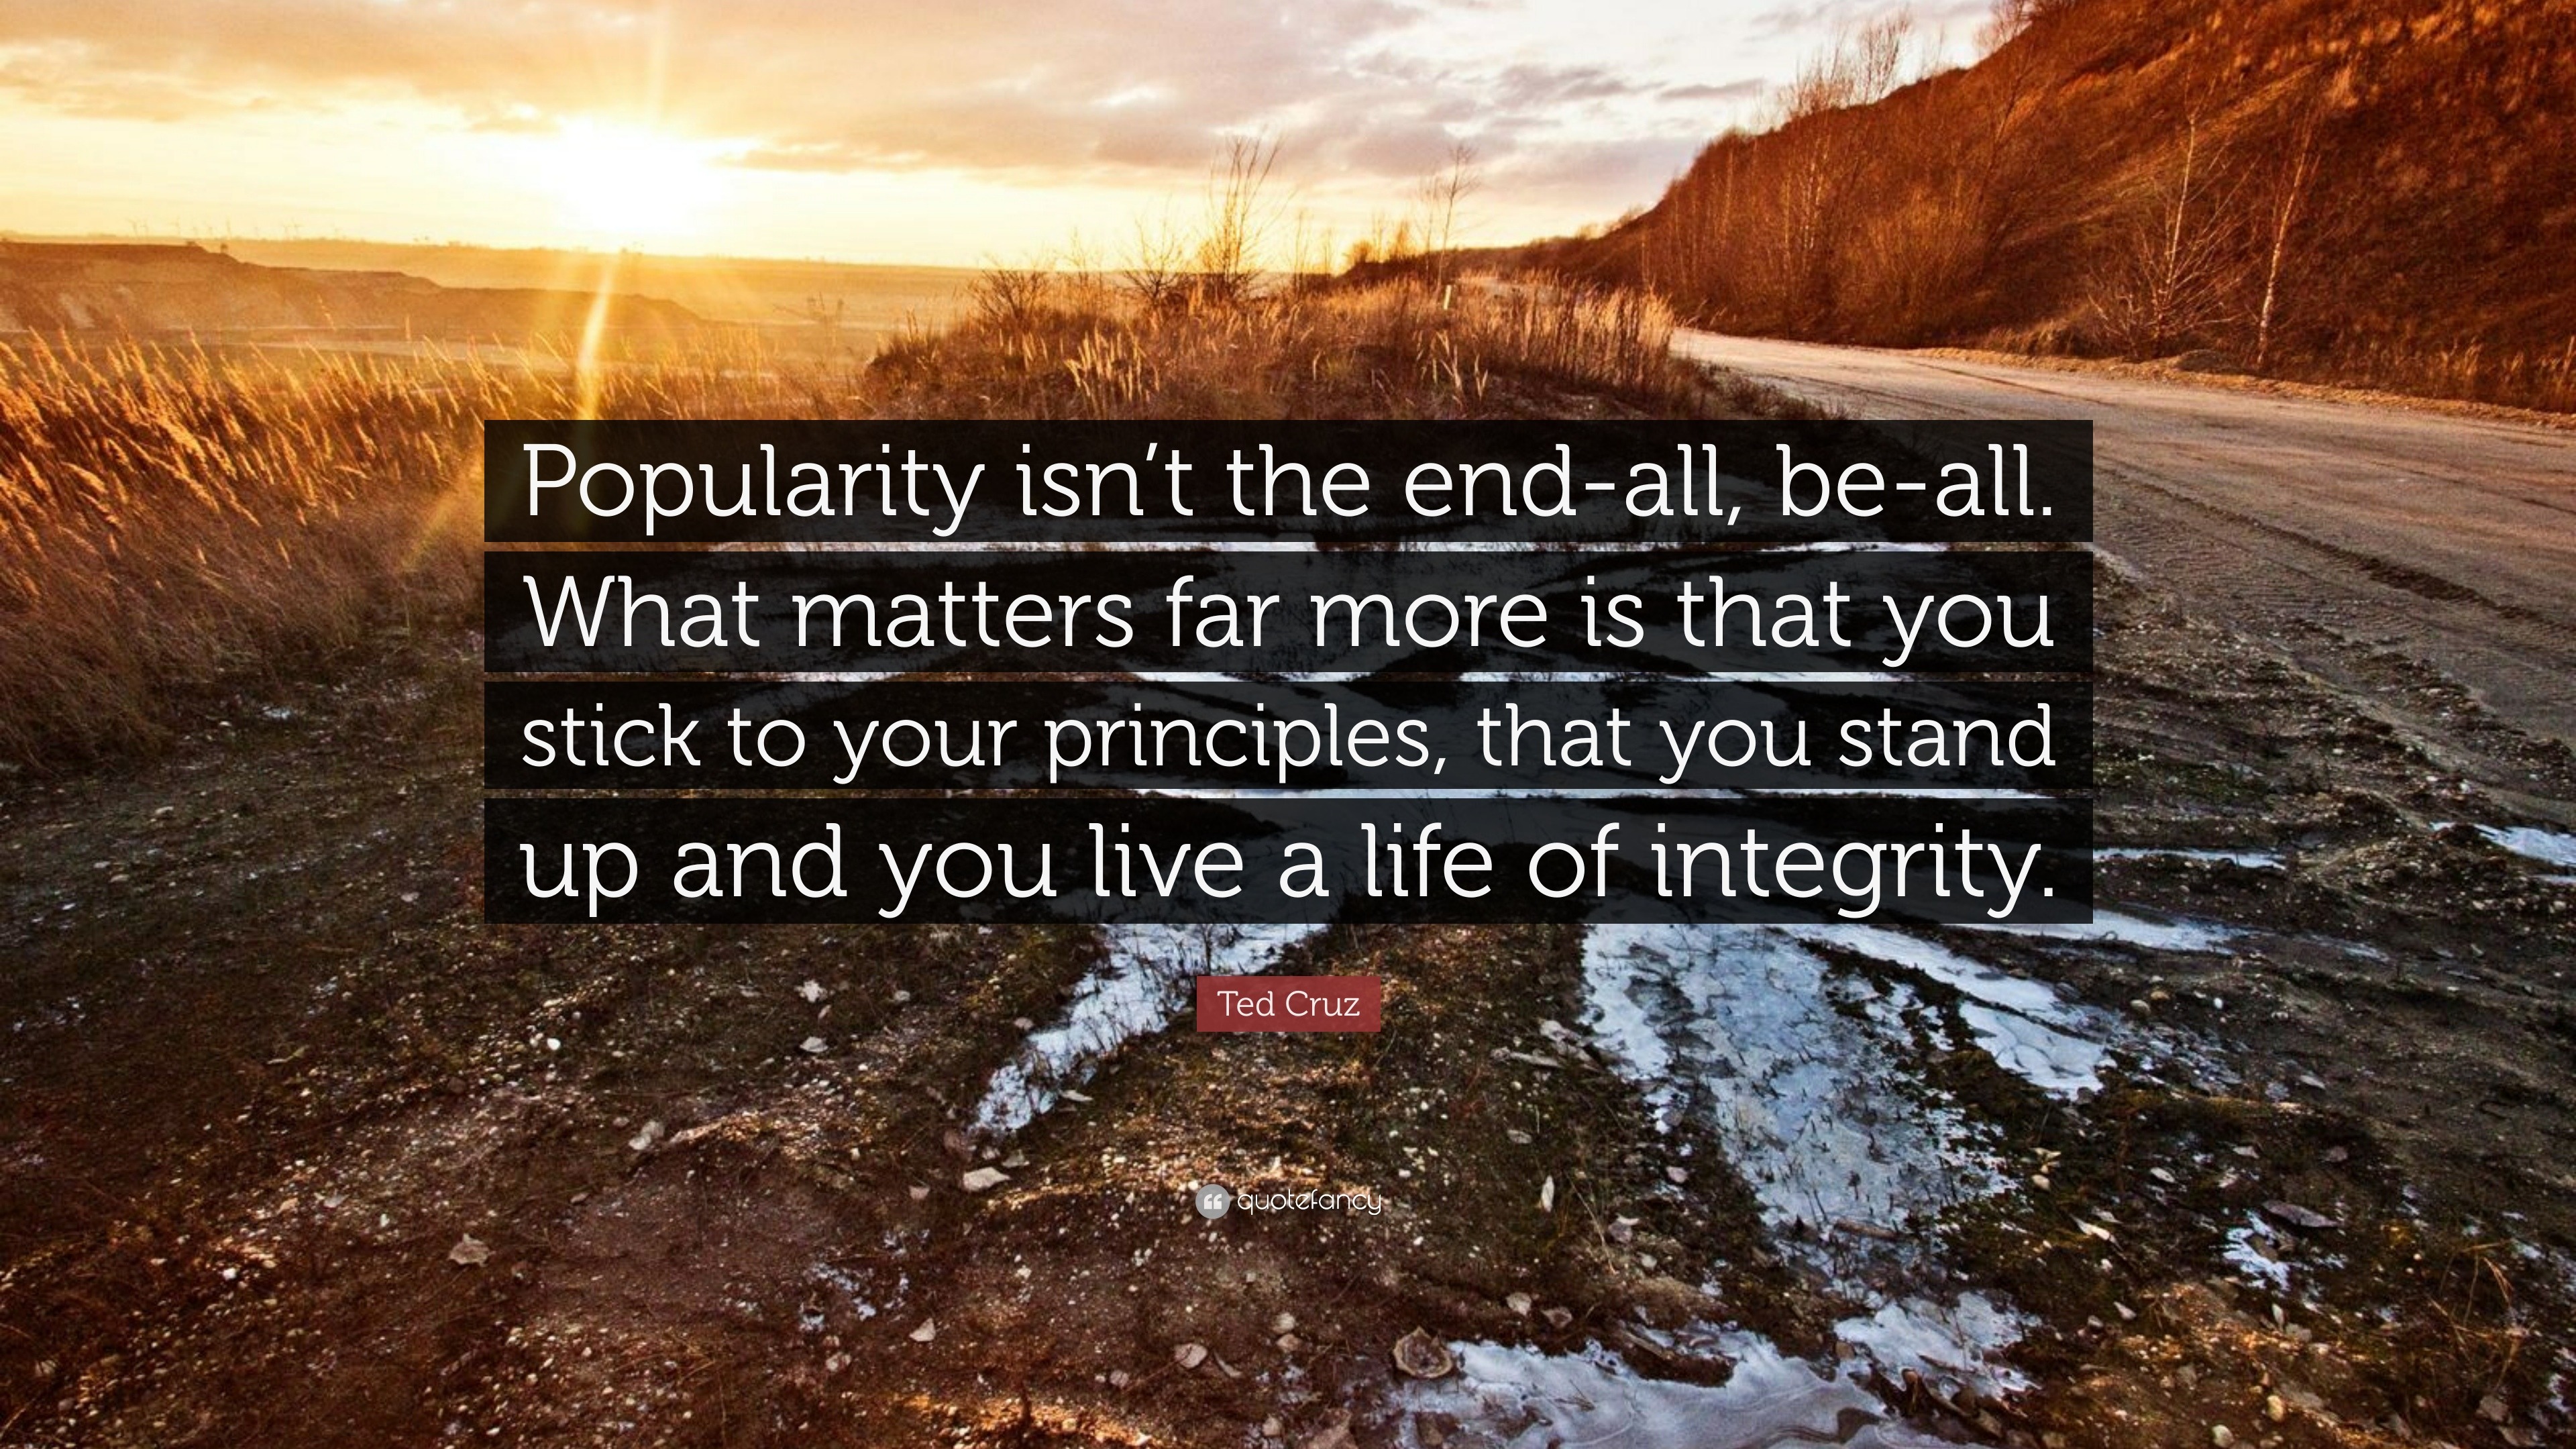 https://quotefancy.com/media/wallpaper/3840x2160/607710-Ted-Cruz-Quote-Popularity-isn-t-the-end-all-be-all-What-matters.jpg